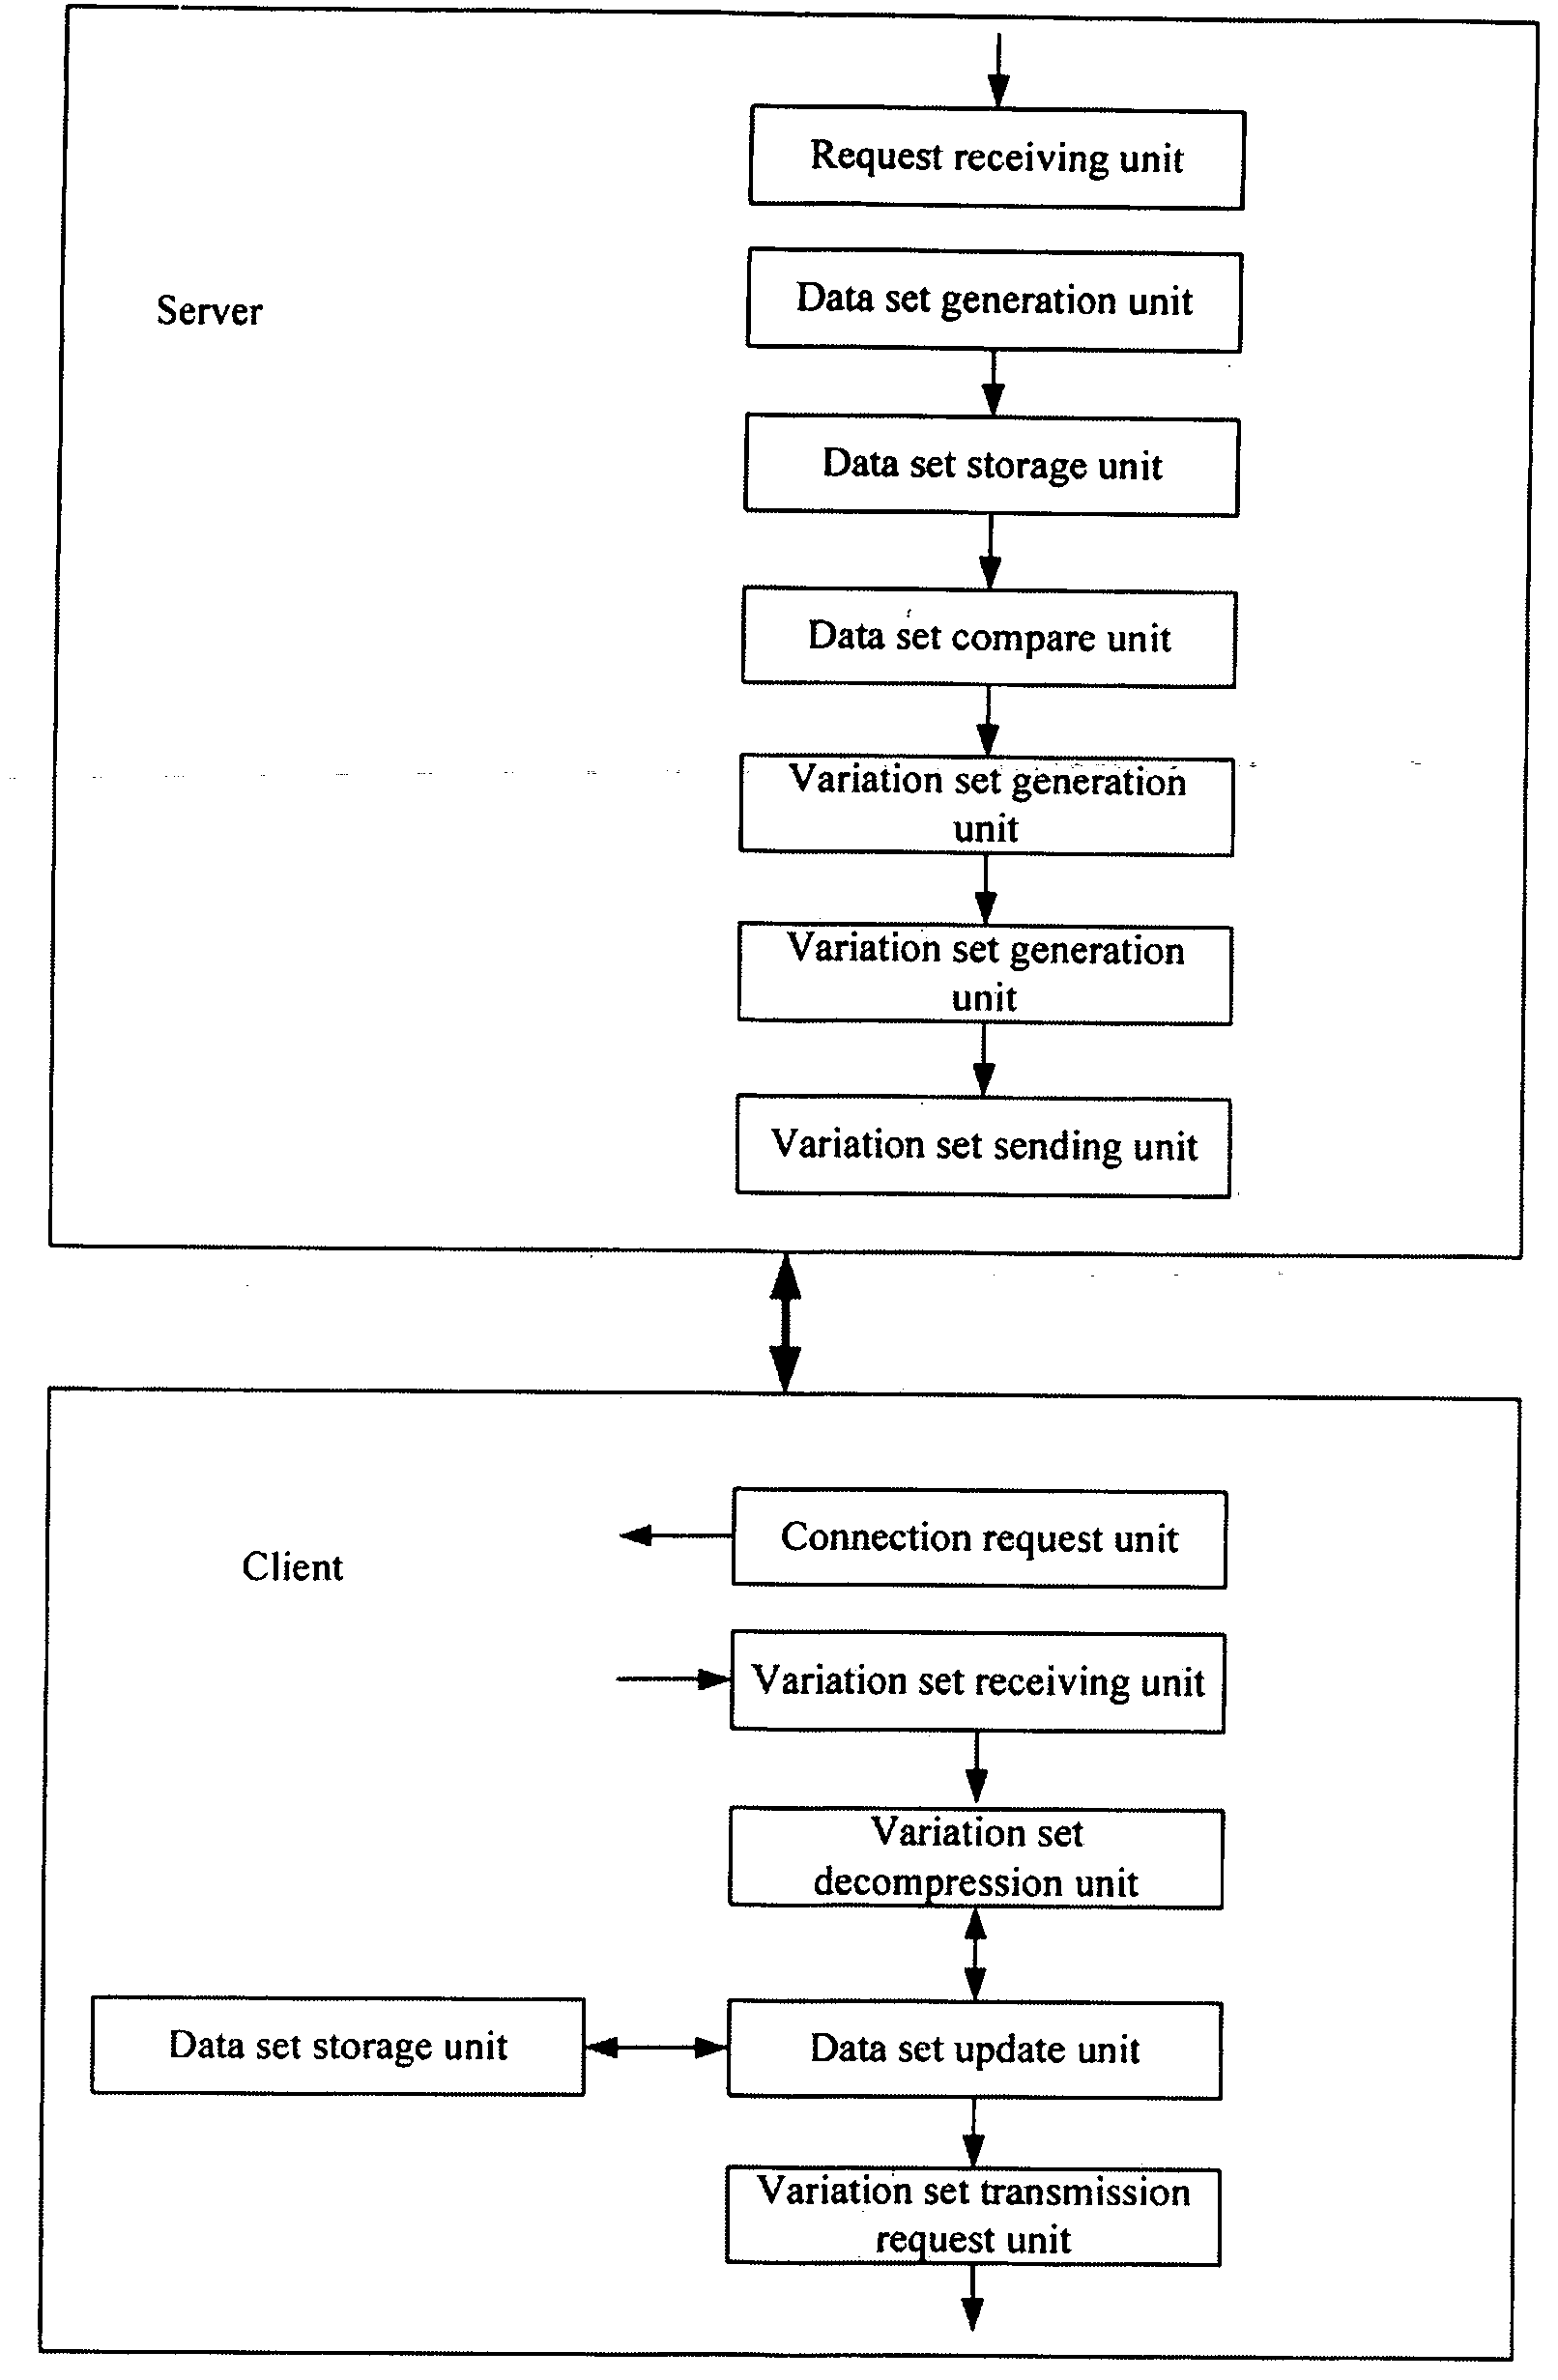 Method and Device for Transmission and Update of Continuous Data Set